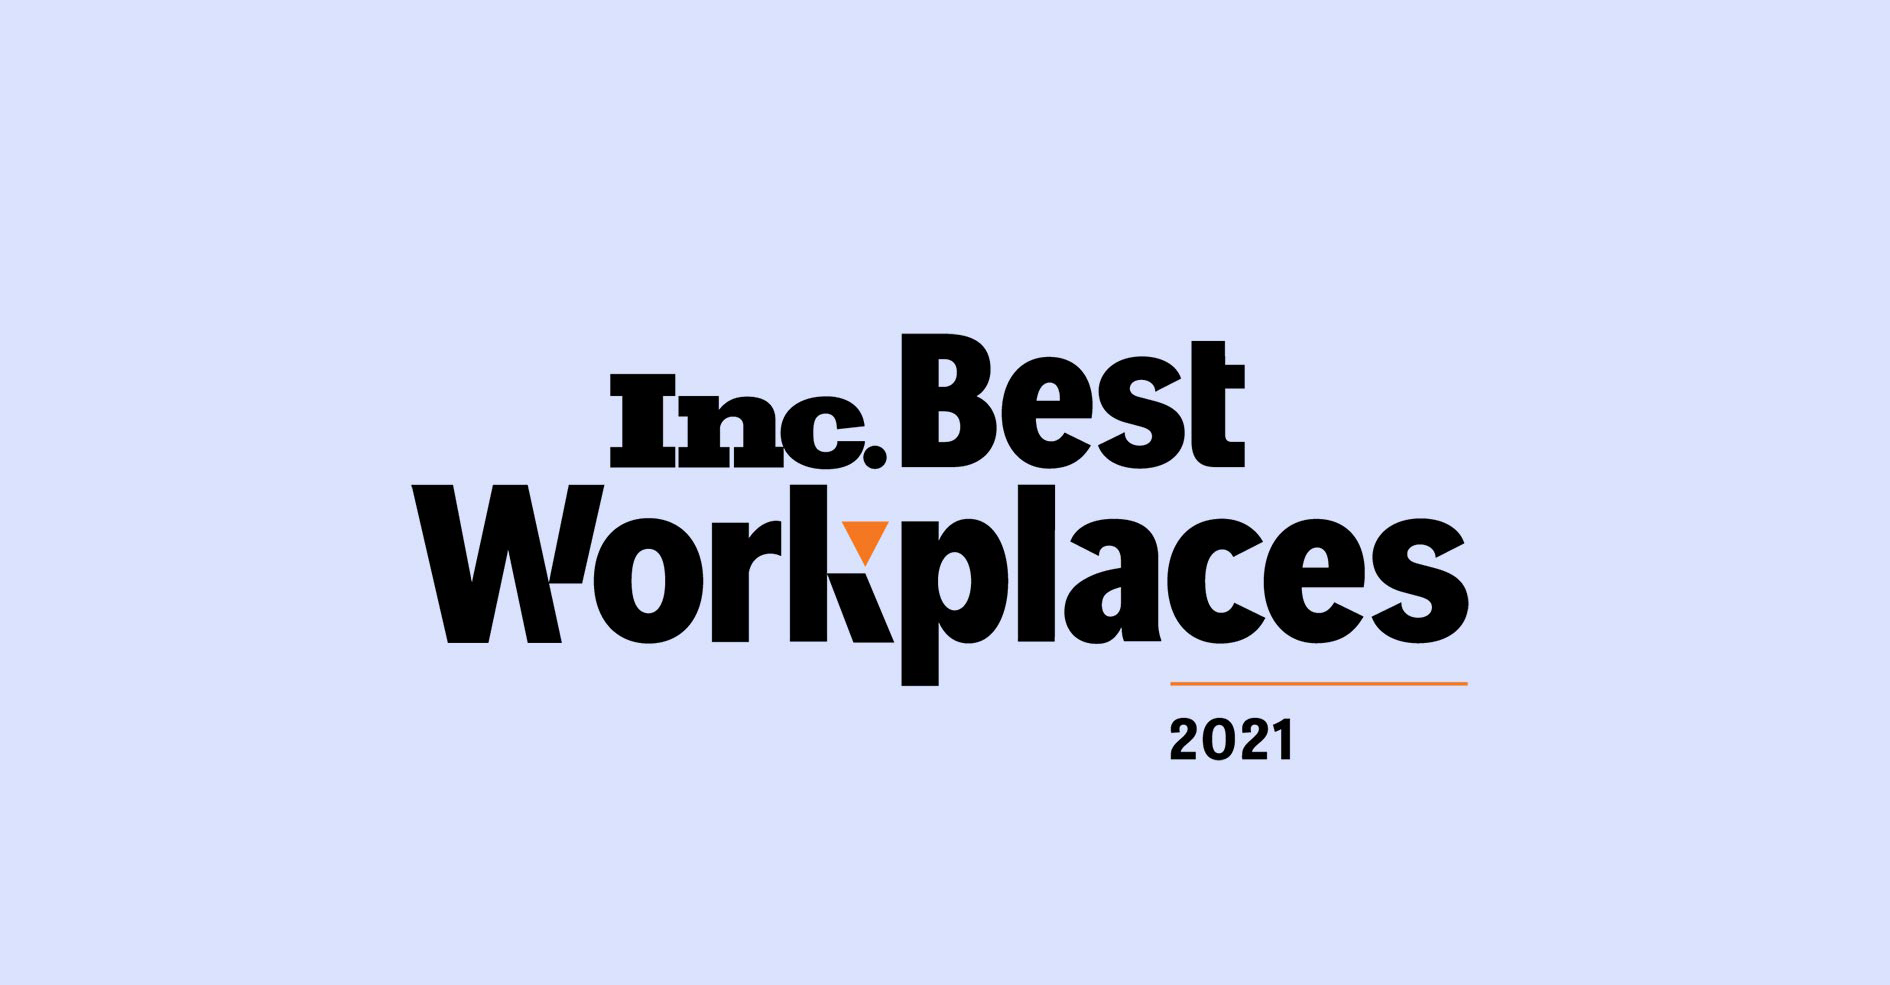 Inc. Best Workplaces 2021